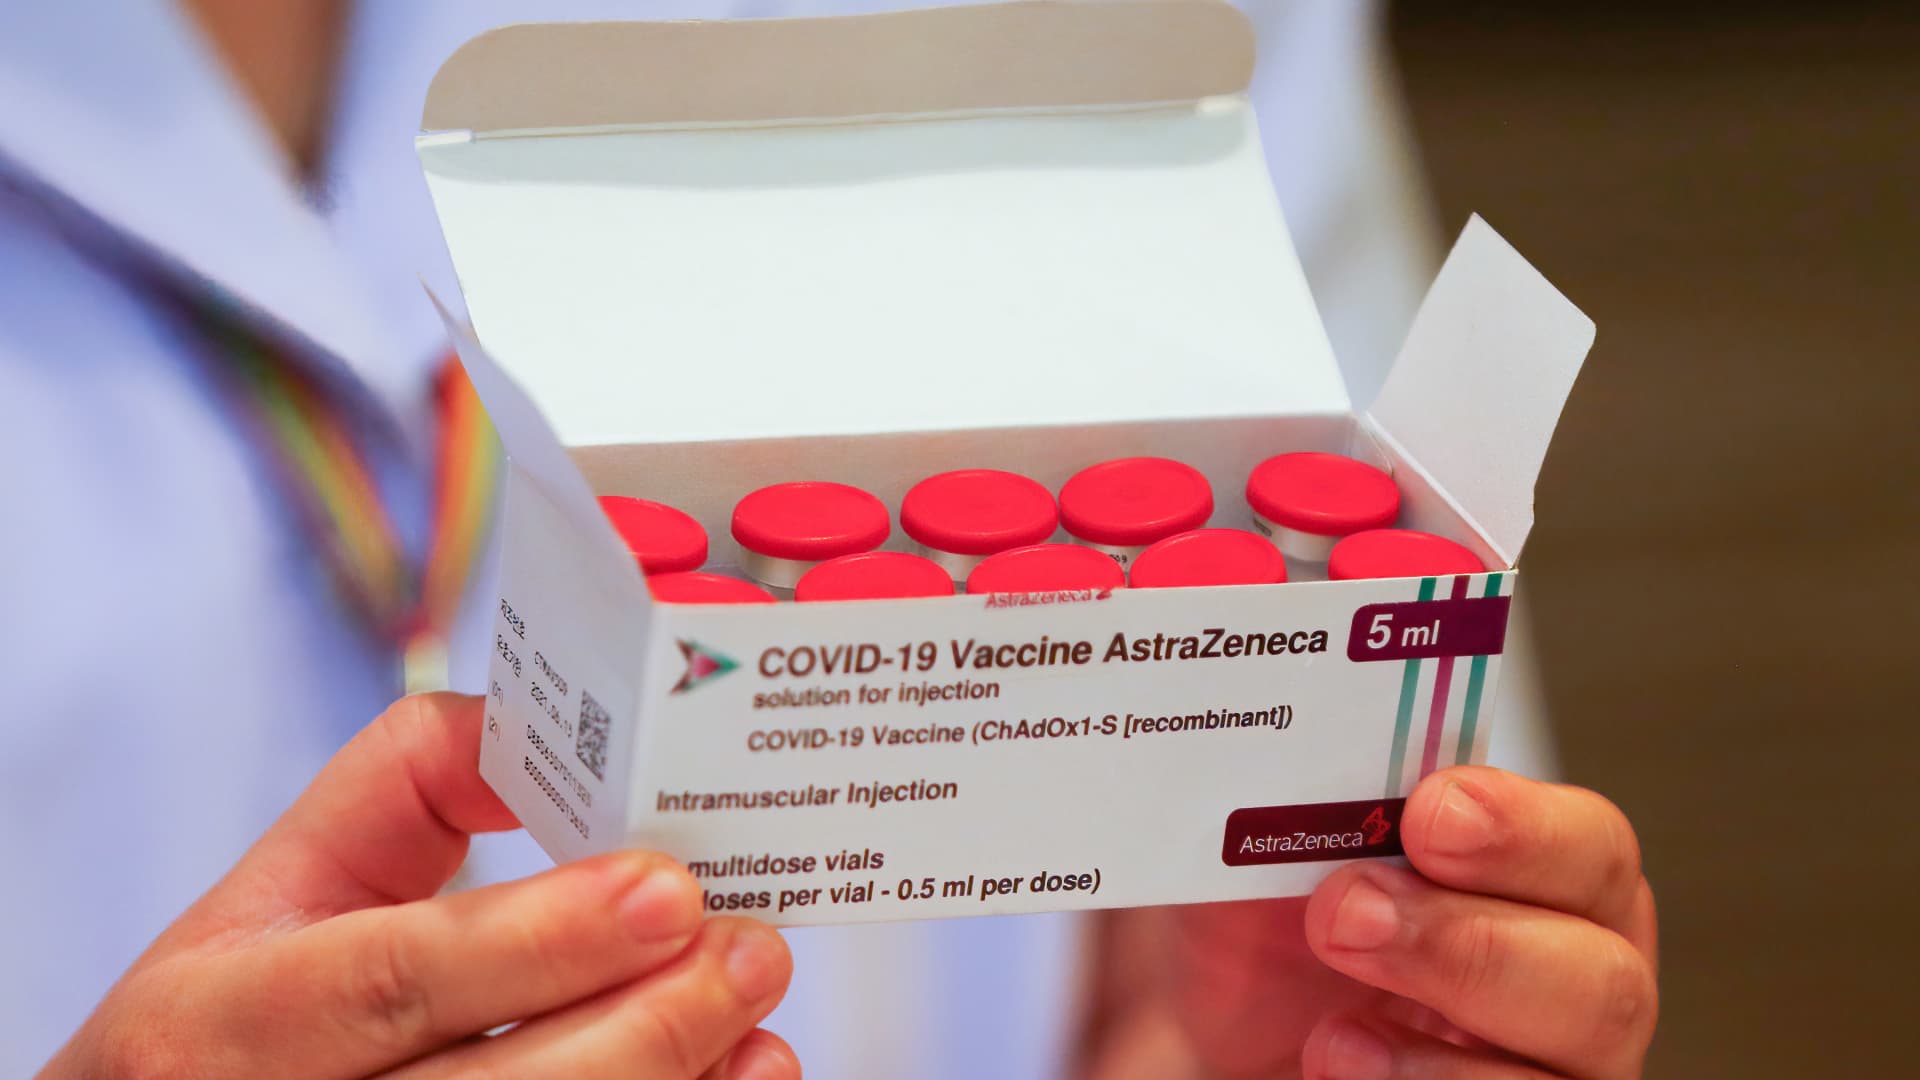 A health worker holds a box of the AstraZeneneca vaccine at the Bamrasnaradura Infectious Diseases Institute in Nonthaburi province on the outskirts of Bangkok.